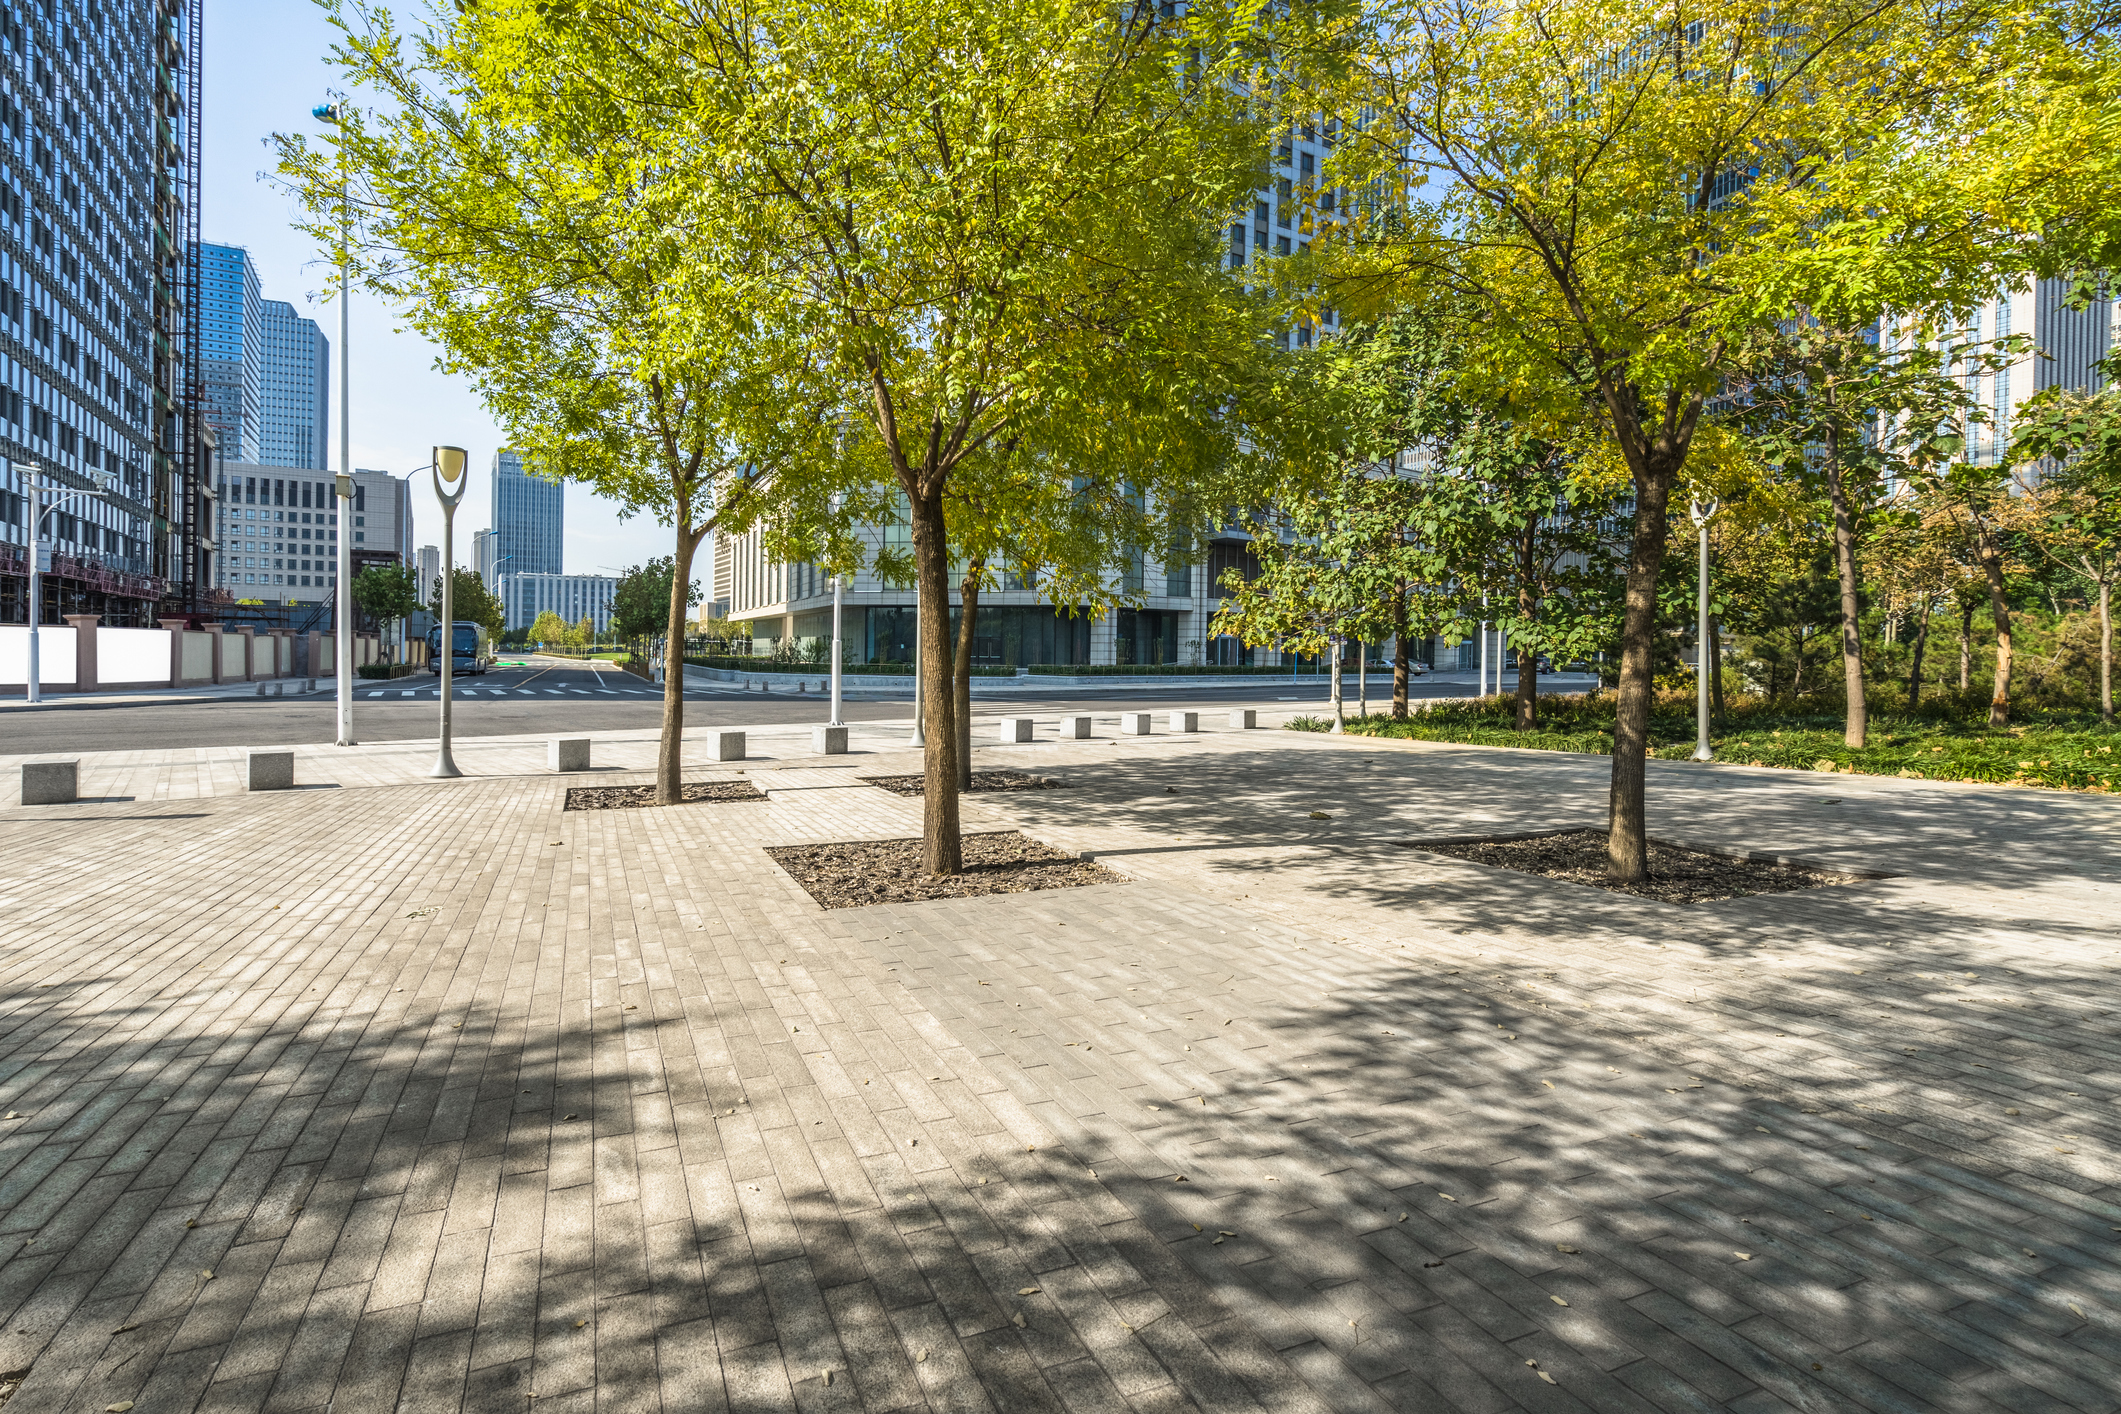 Strategic placement of urban trees for shade can reduce surface temperatures by 20-30°C. PHOTO:...